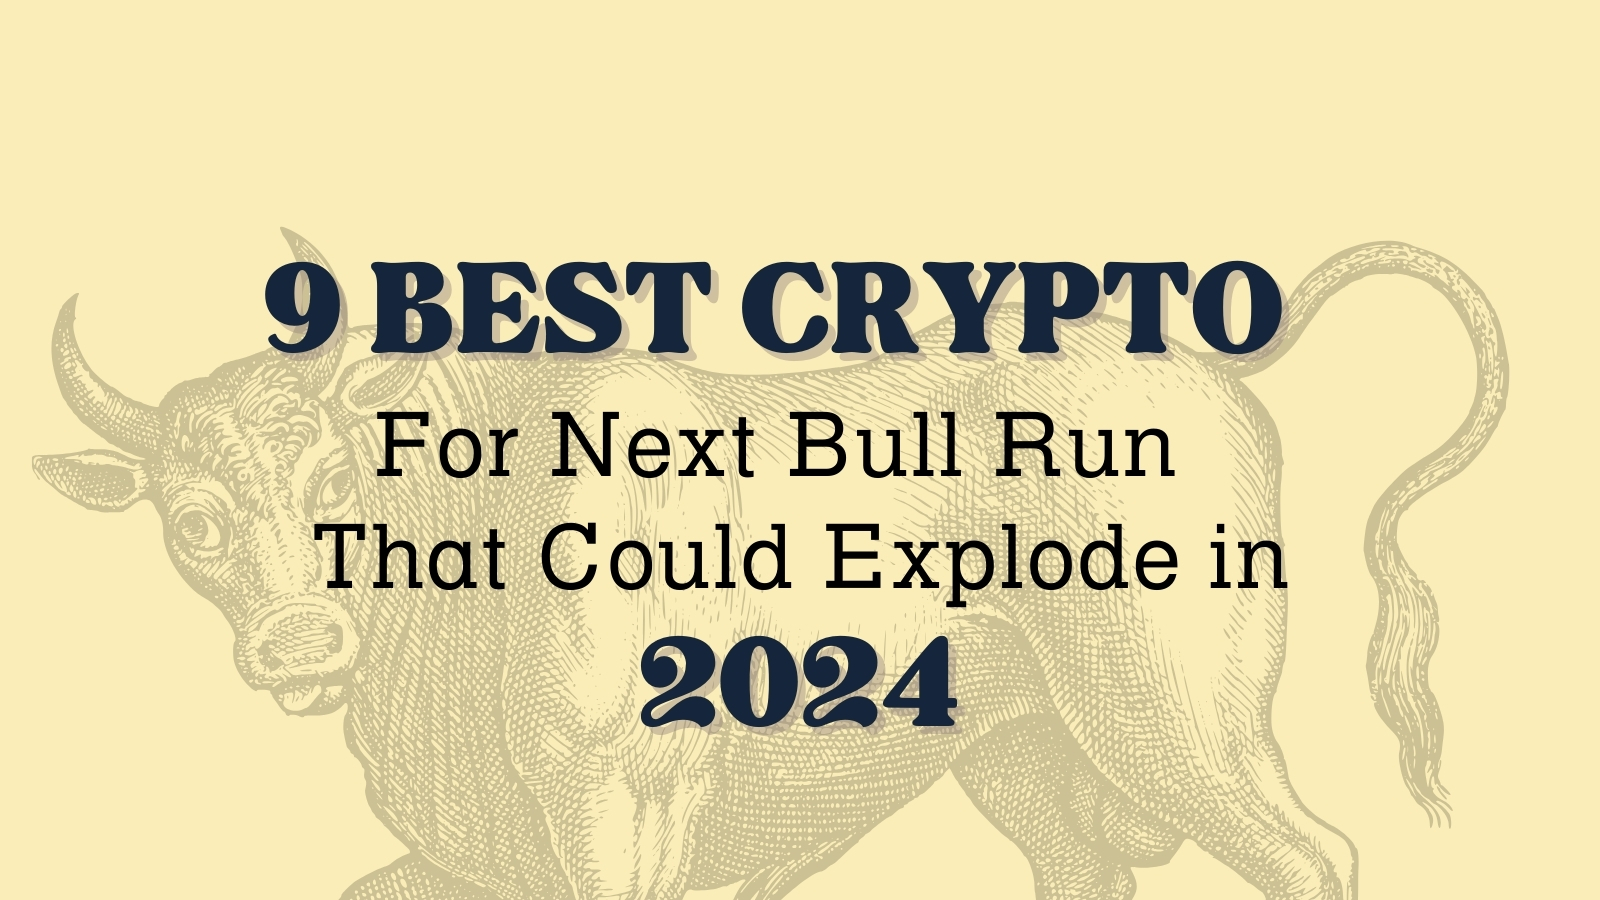 9 Best Crypto For Next Bull Run That Could Explode in 2024 - Darklume stands out as the Metaverse pioneer